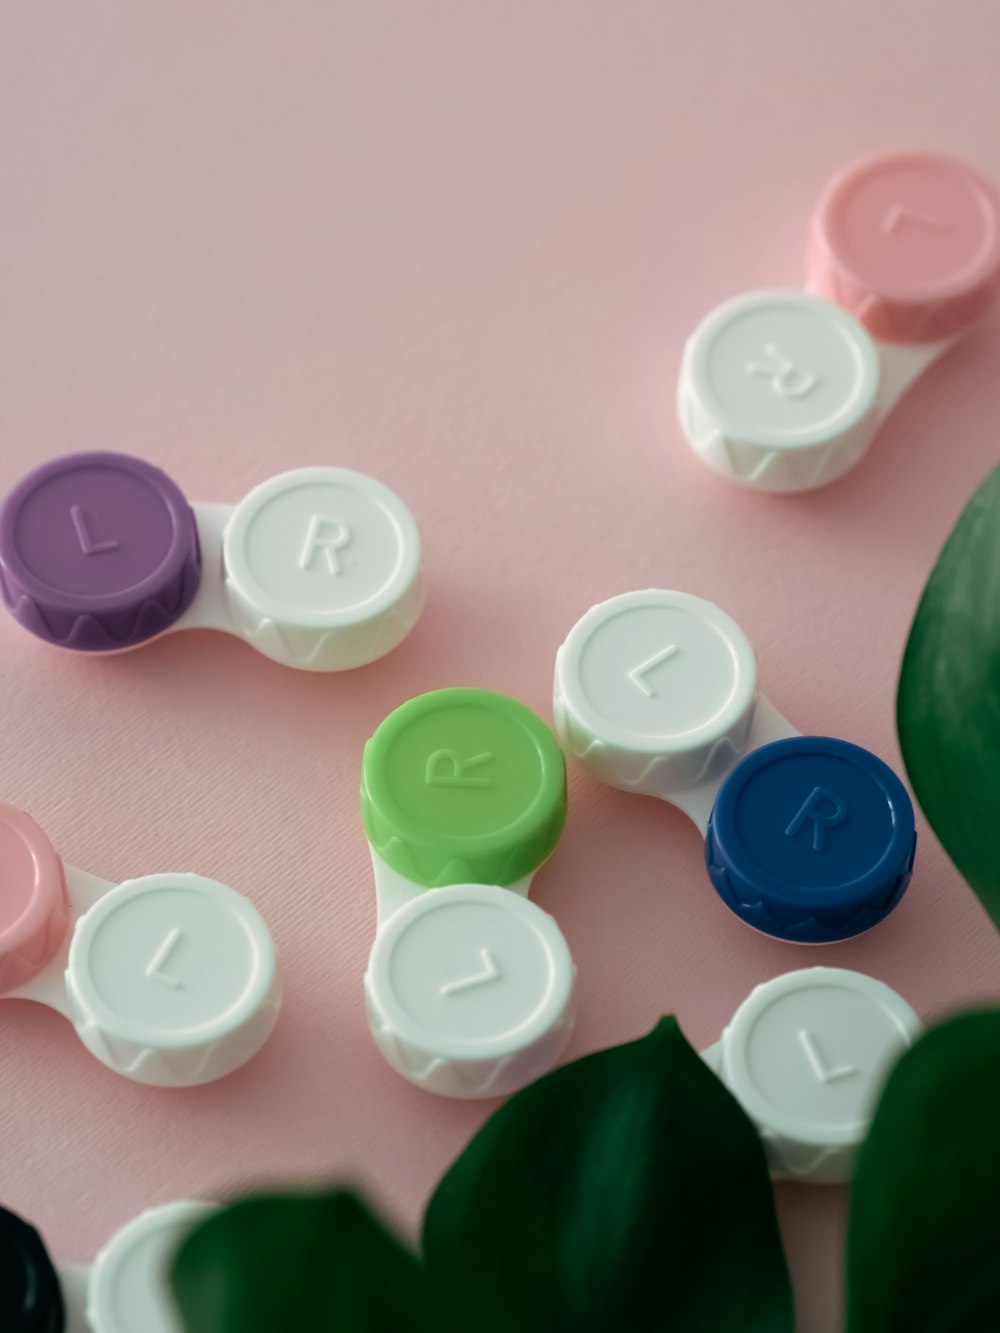 a close up of a group of pills on a pink surface